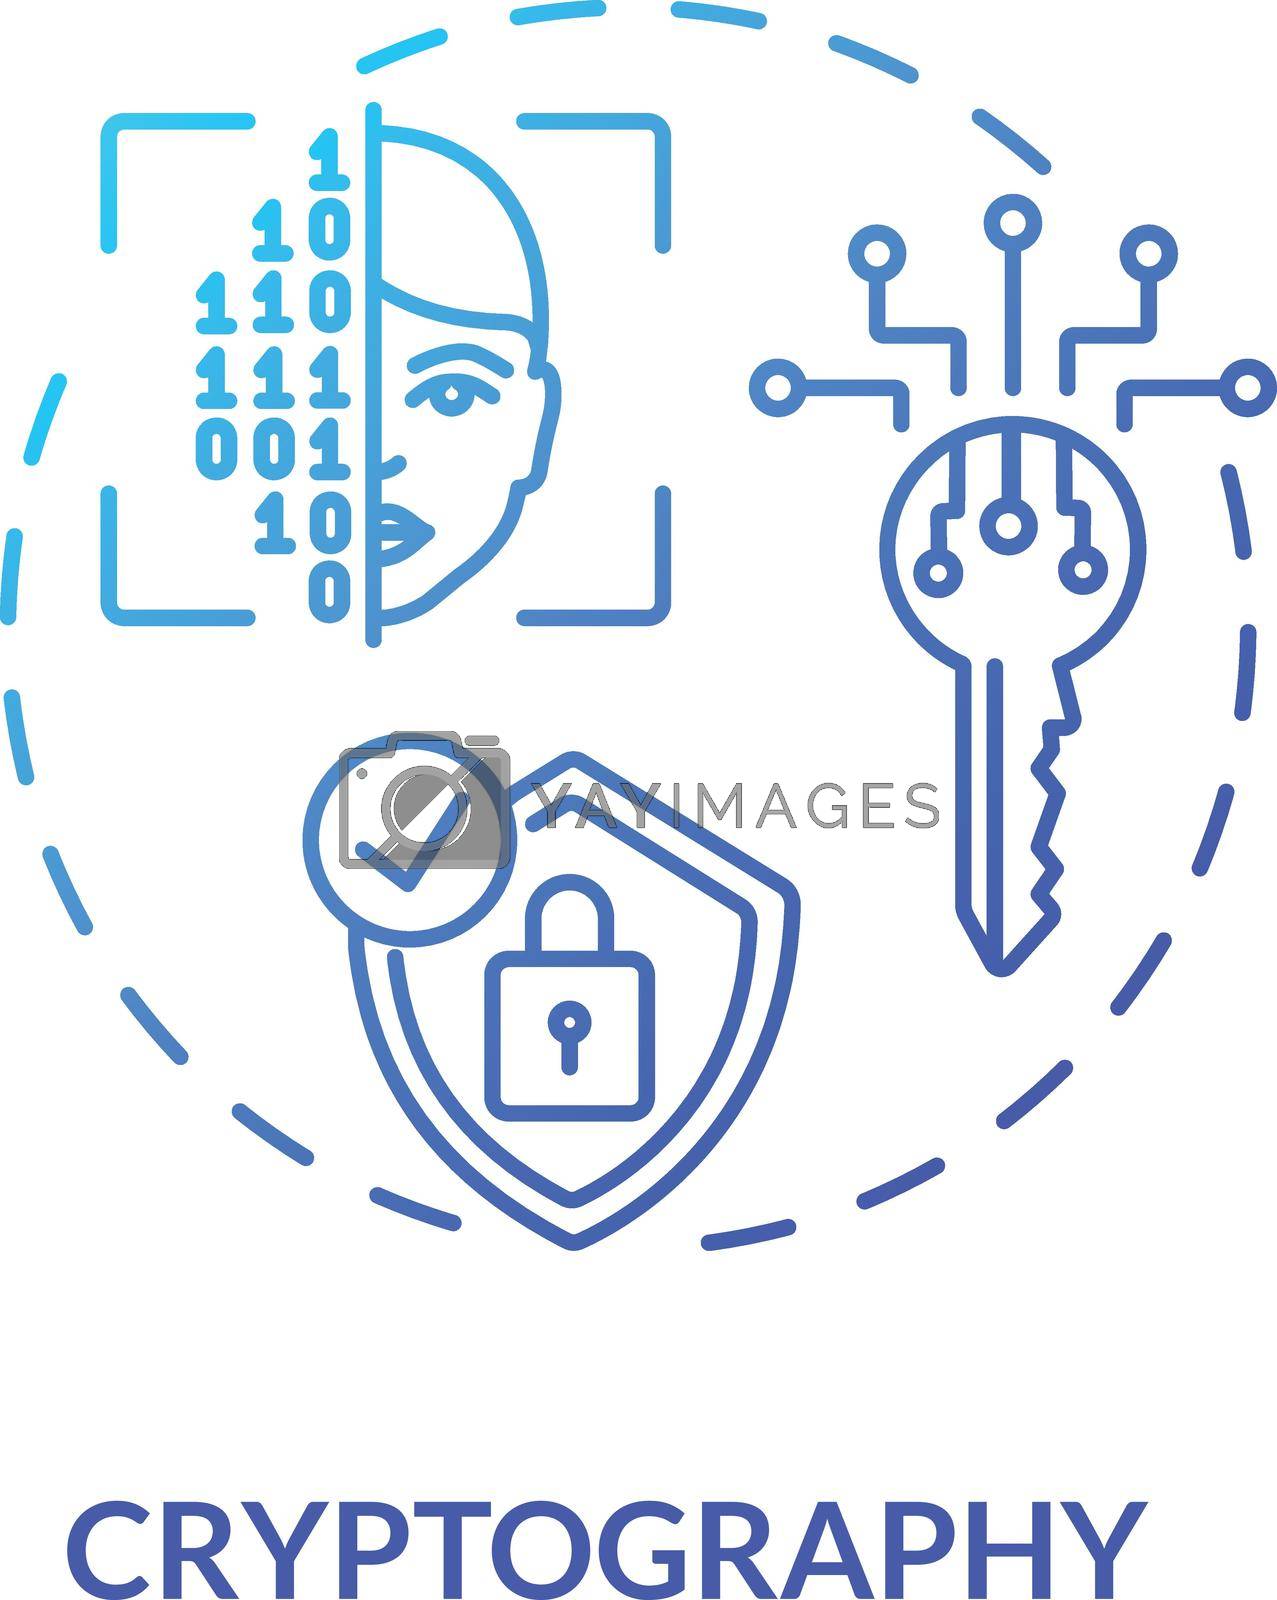 Cryptography concept icon. Encryption, decryption. Secure communications techniques idea thin line illustration. Secret-key, public key, hash function. Vector isolated outline RGB color drawing